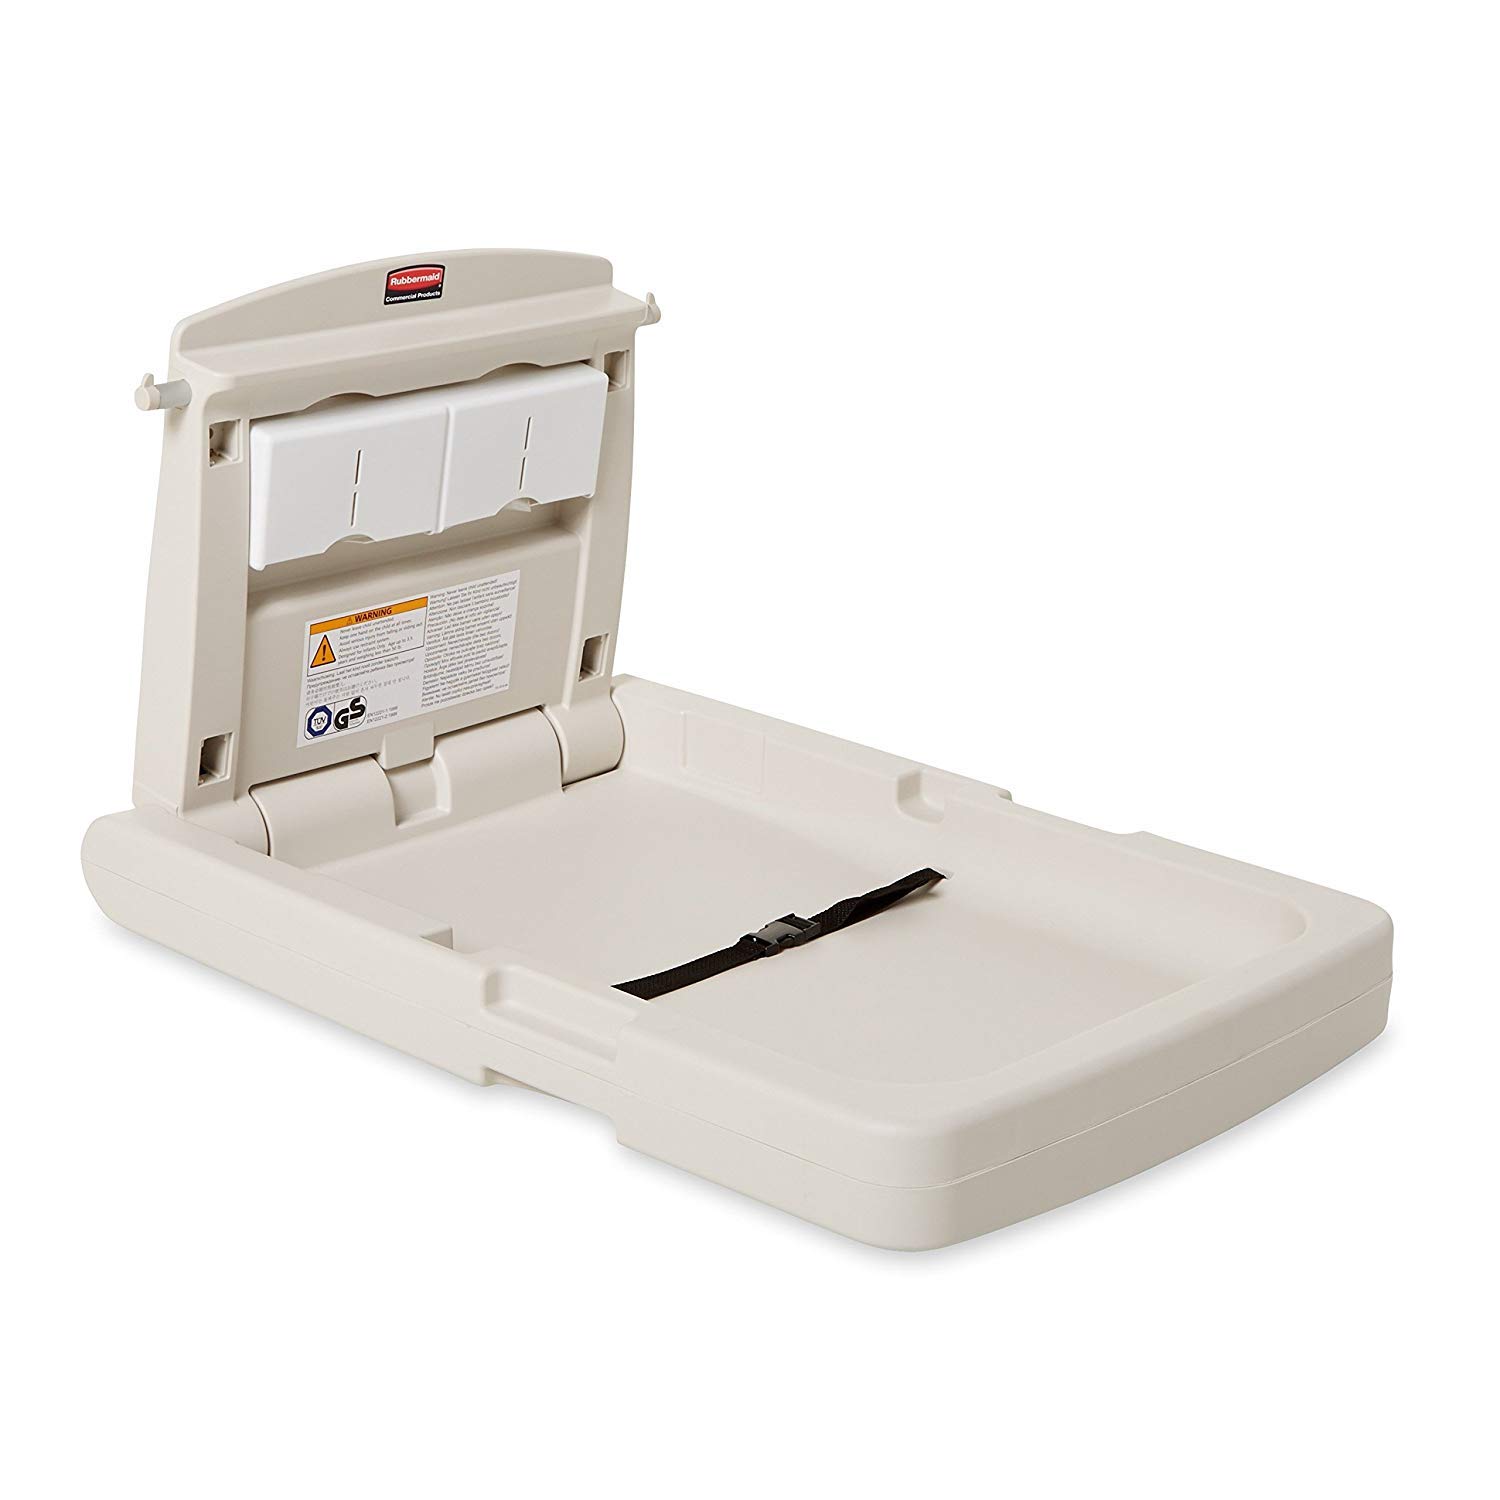 Rubbermaid Commercial Vertical Baby Changing Station, 23